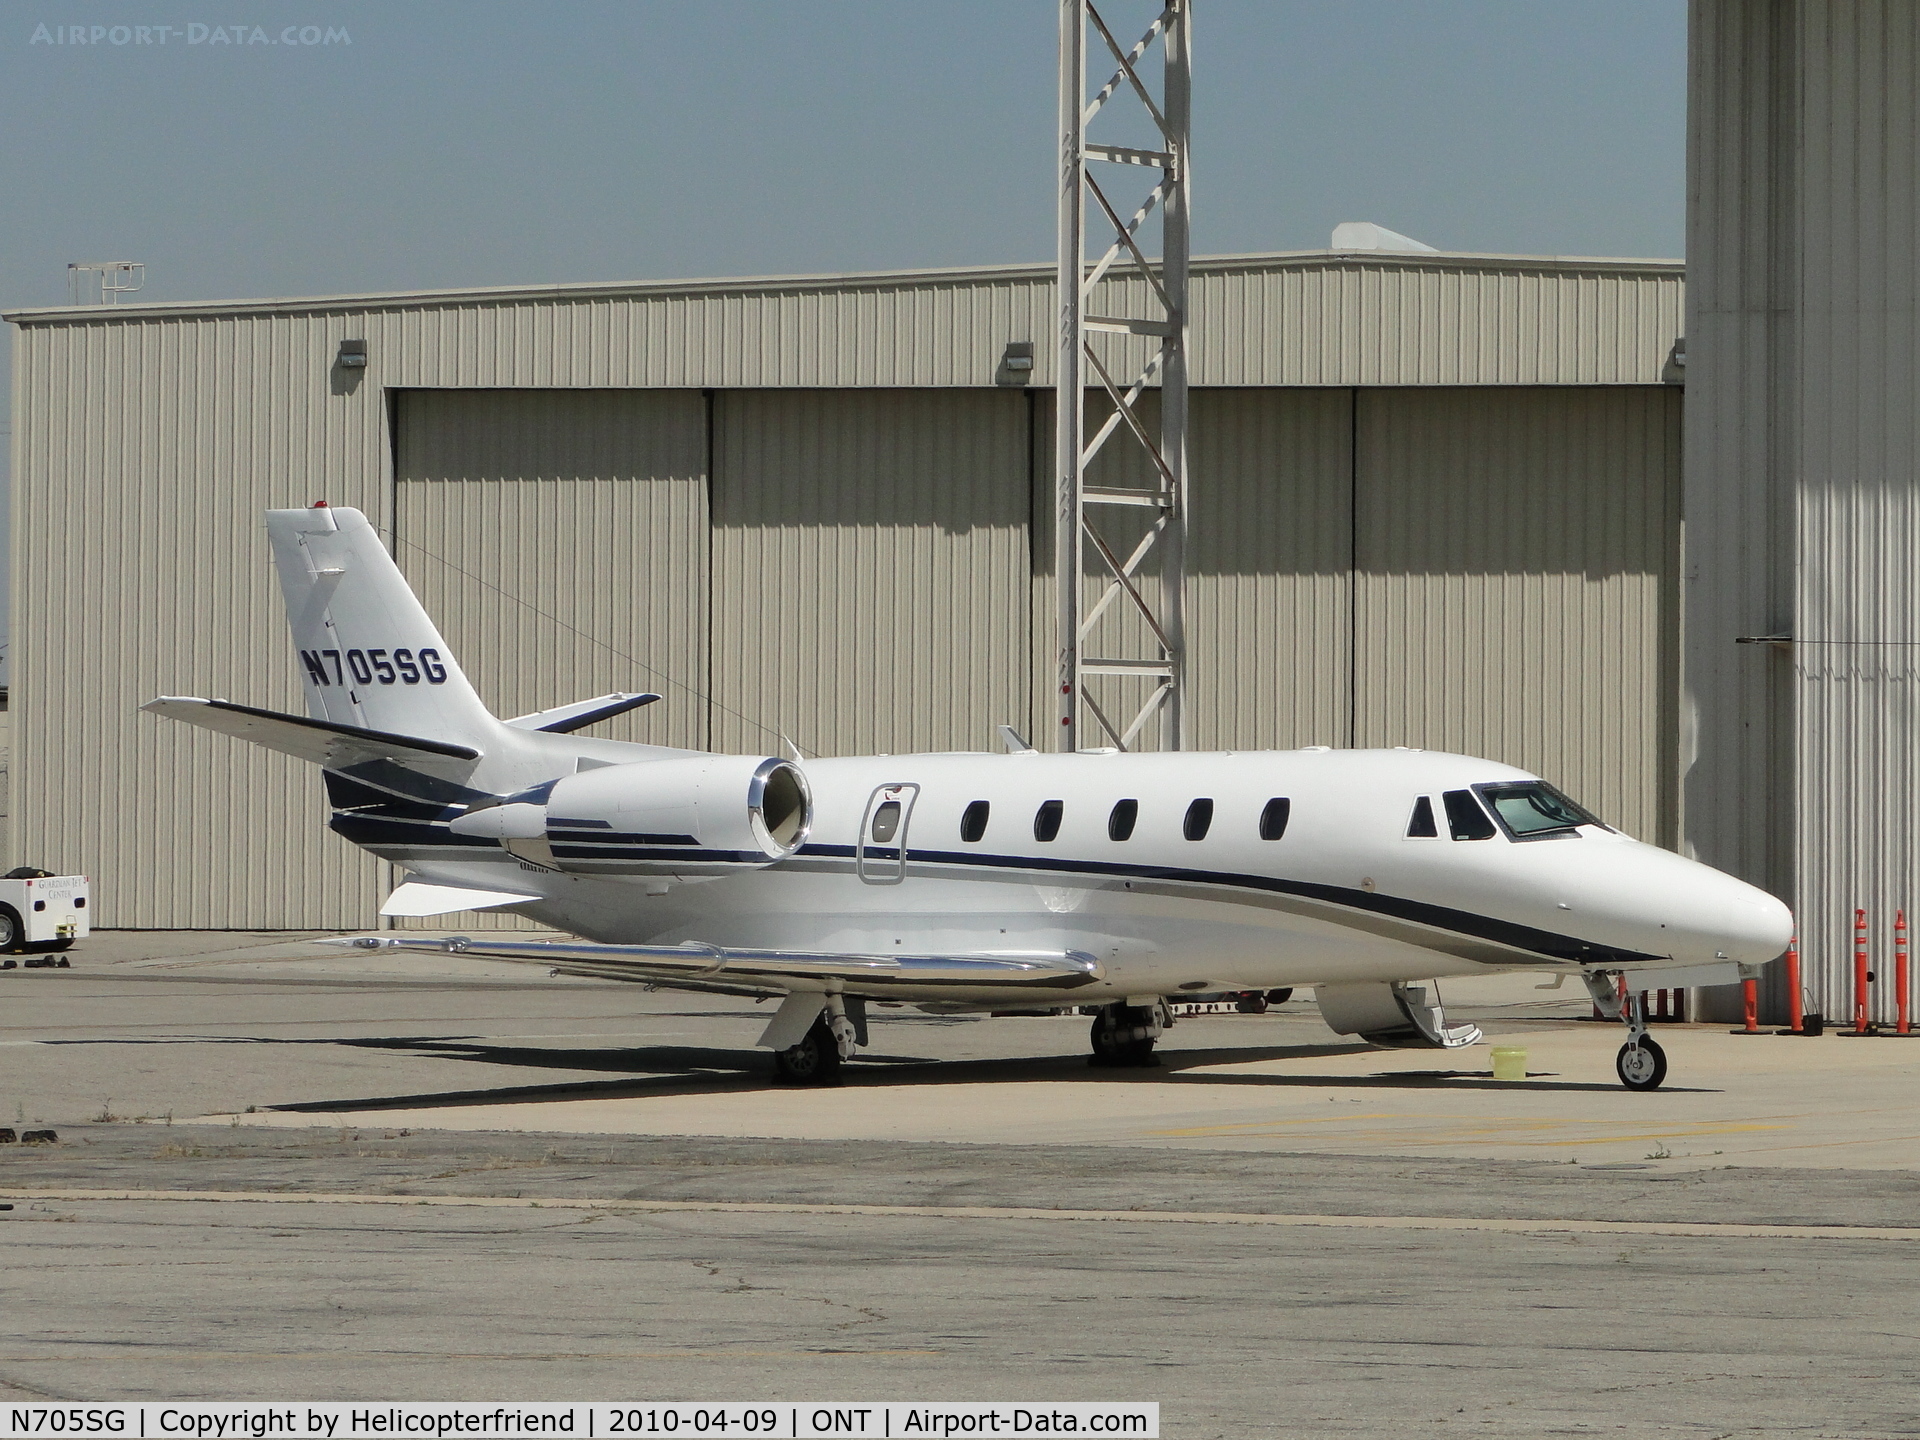 N705SG, 2001 Cessna 560XL C/N 560-5142, Just been refueled and waiting